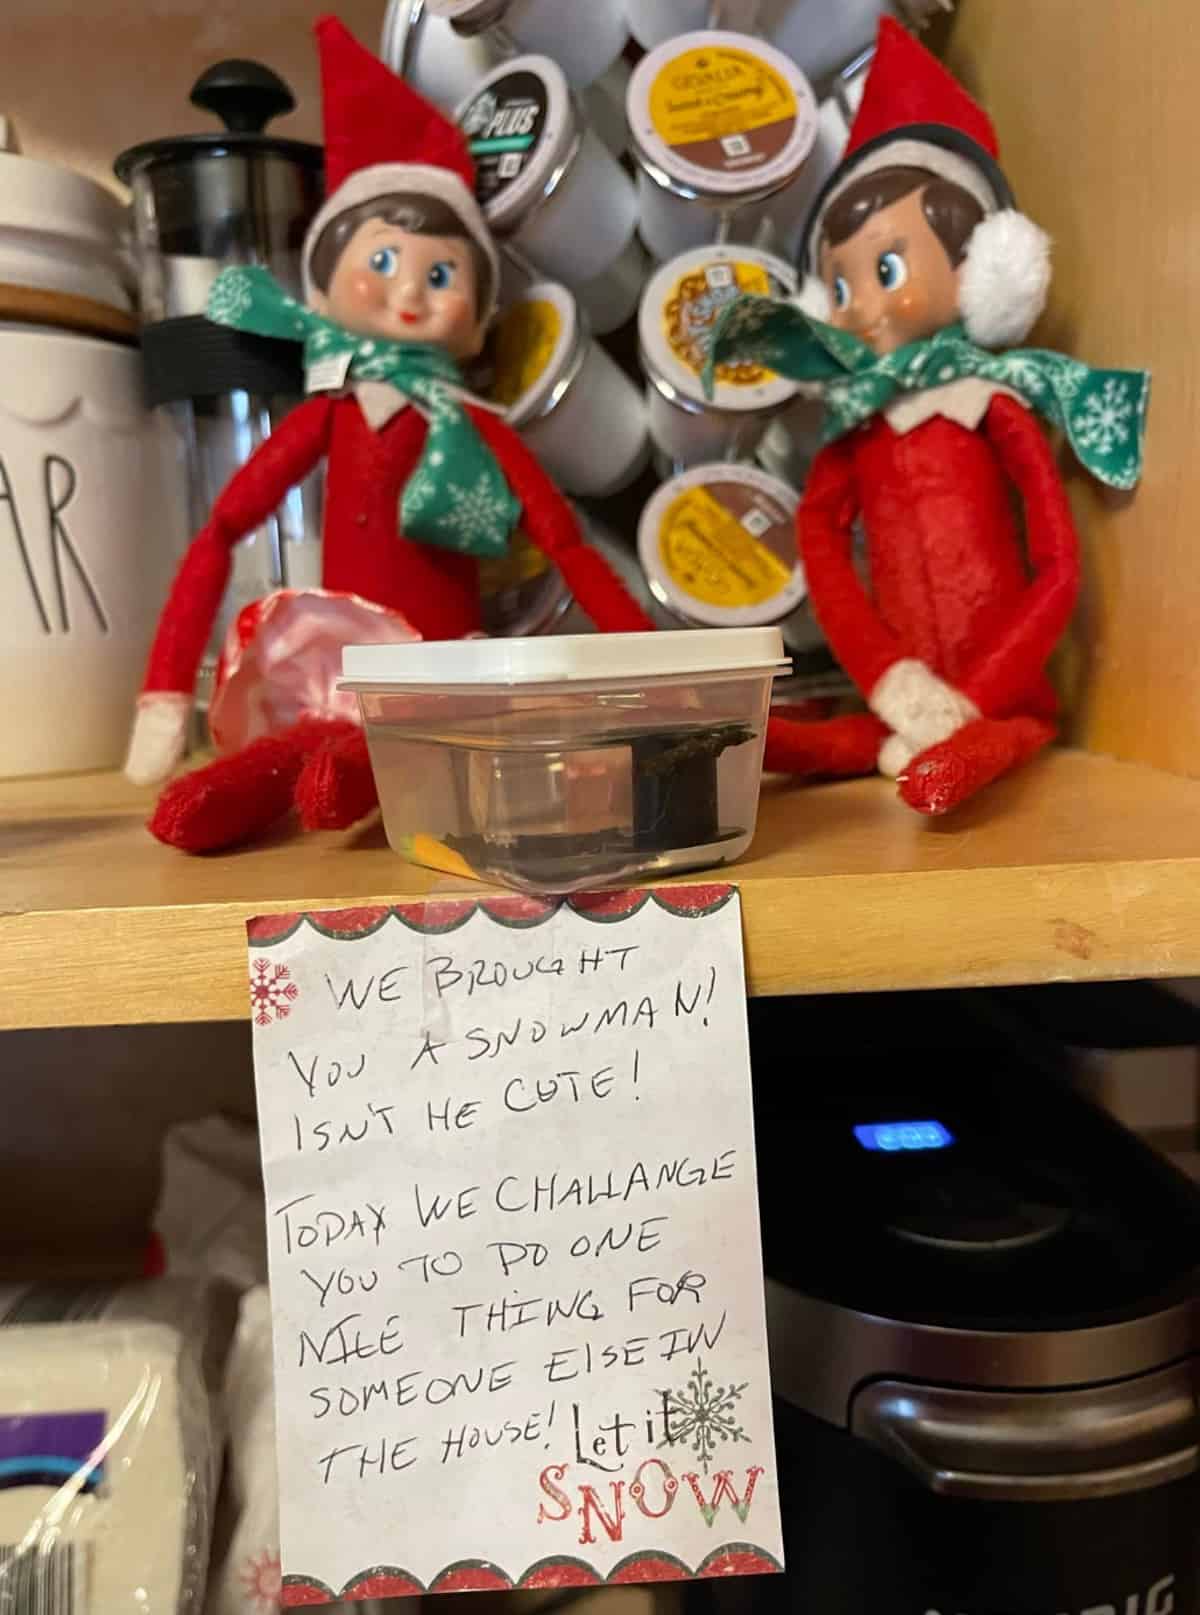 Elf on the shelf sitting on a shelf with a melted snowman